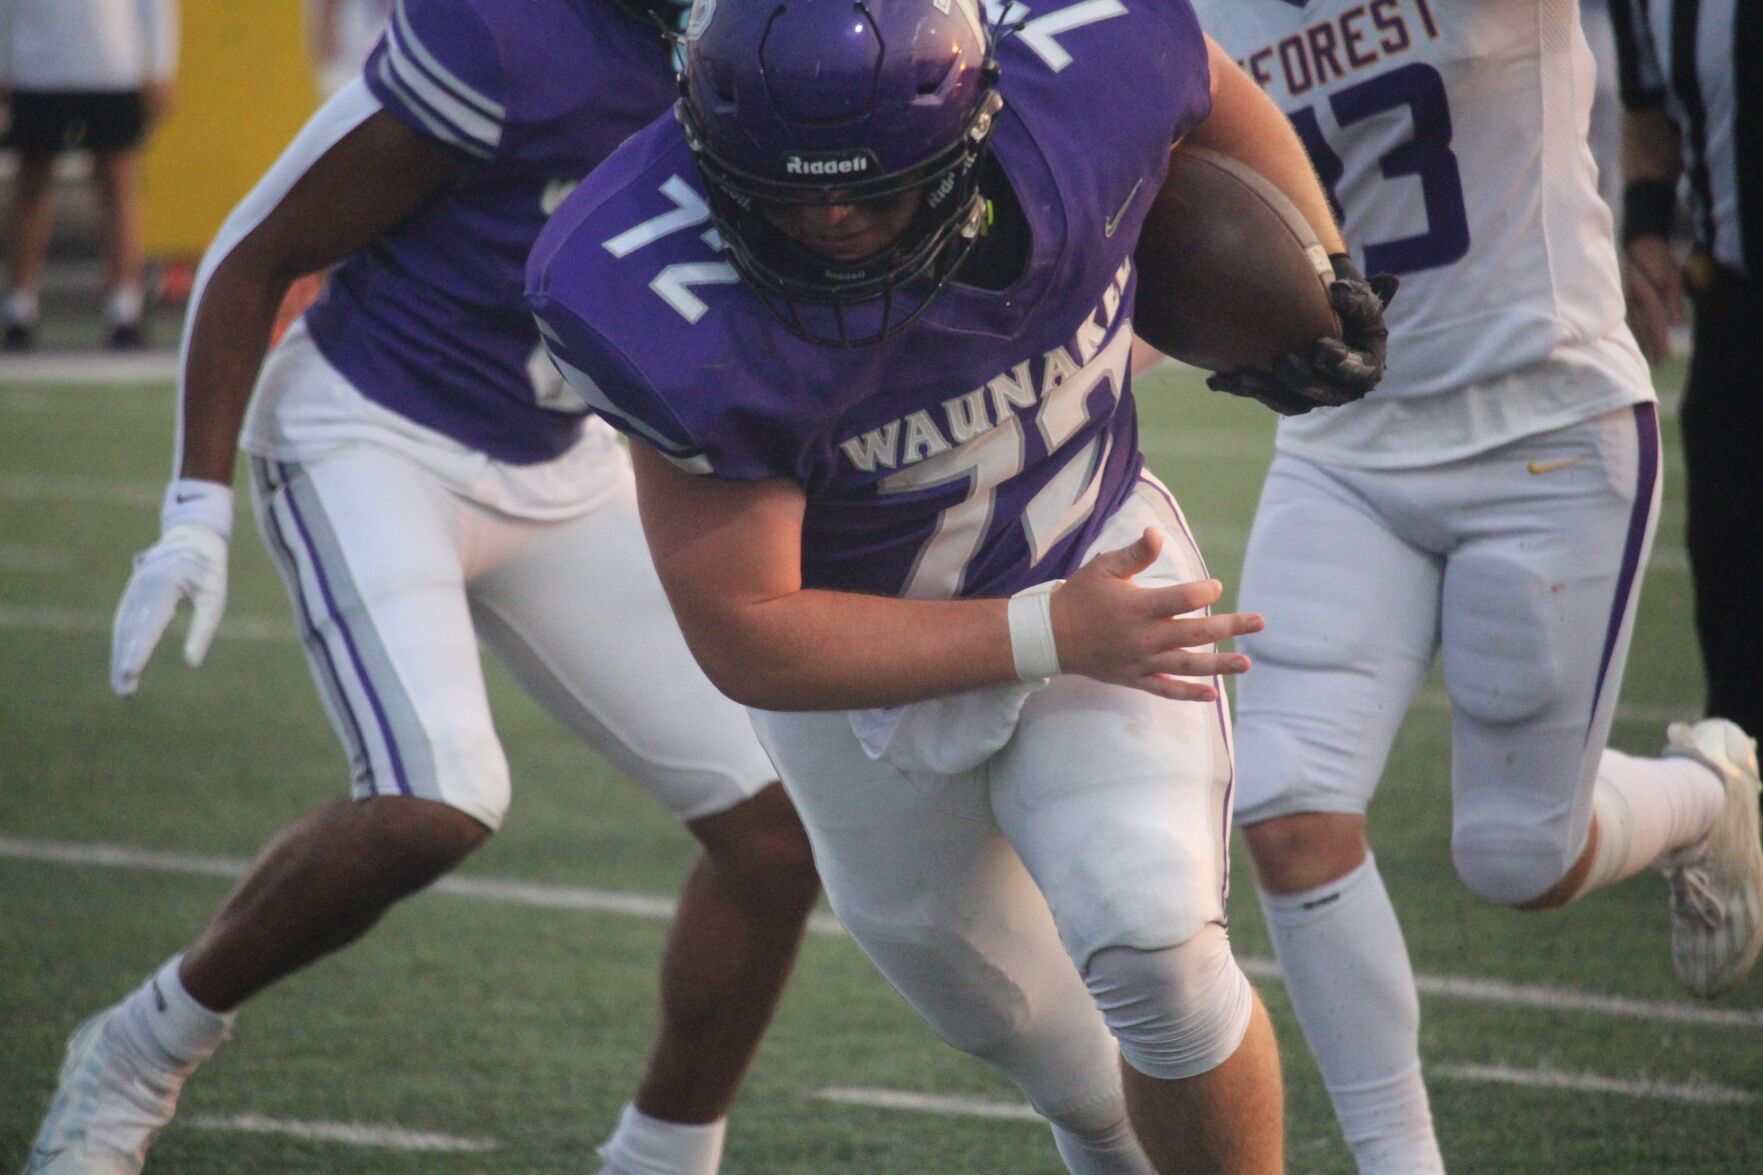 Games of the week: Highly touted Waunakee hosts Sun Prairie East in key gridiron battle